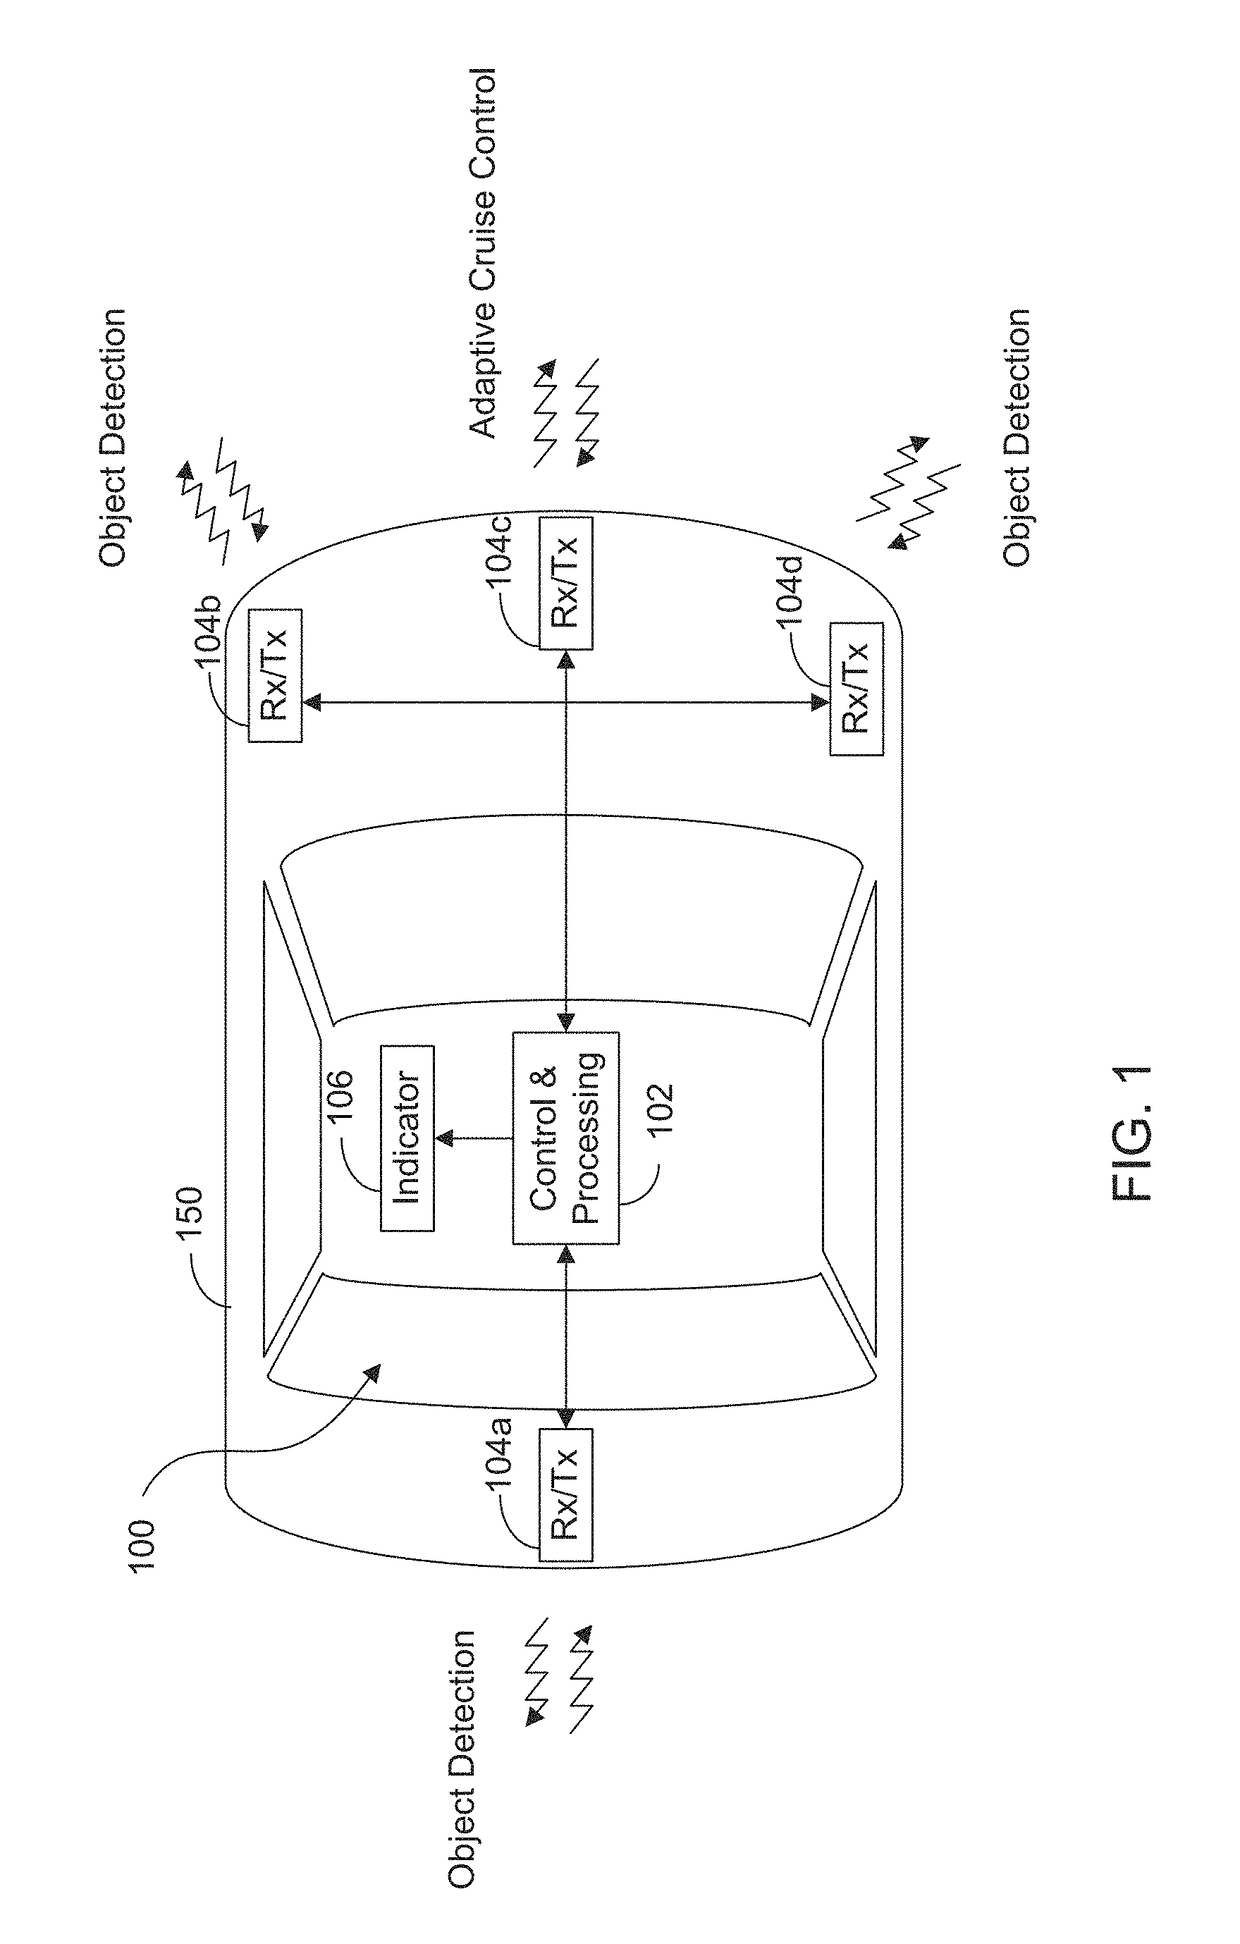 Adaptive filtering for FMCW interference mitigation in PMCW radar systems